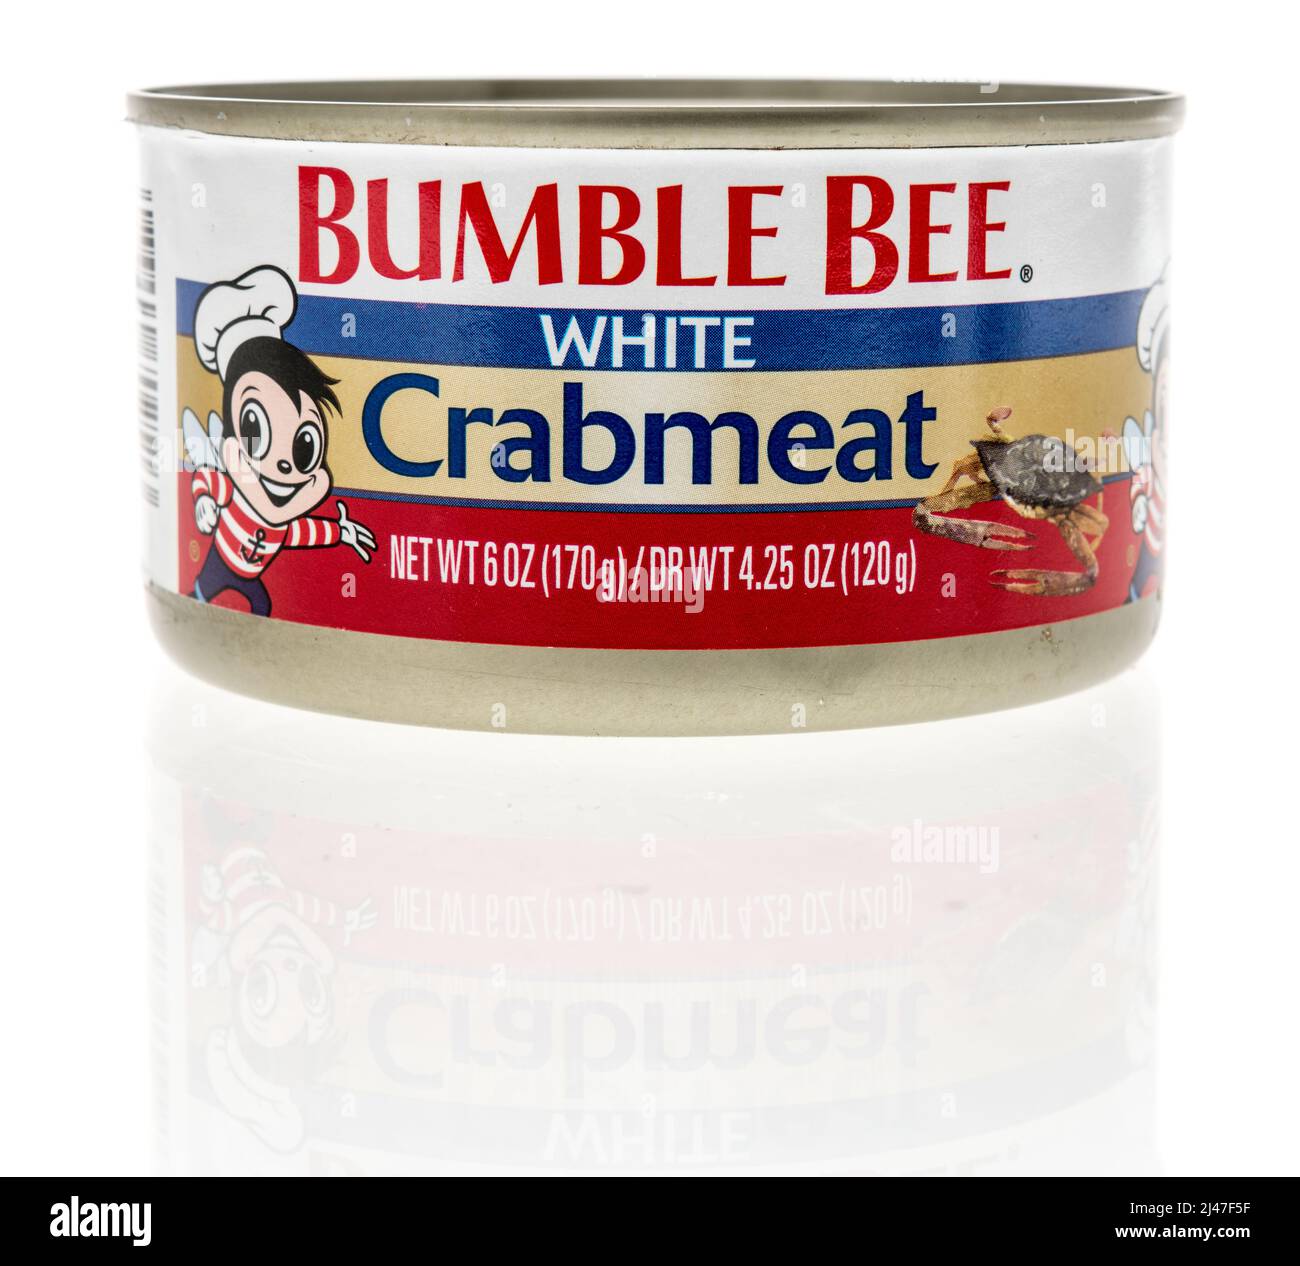 Winneconne, WI -10 April 2022: A can of Bumble bee crab meat on an isolated background Stock Photo